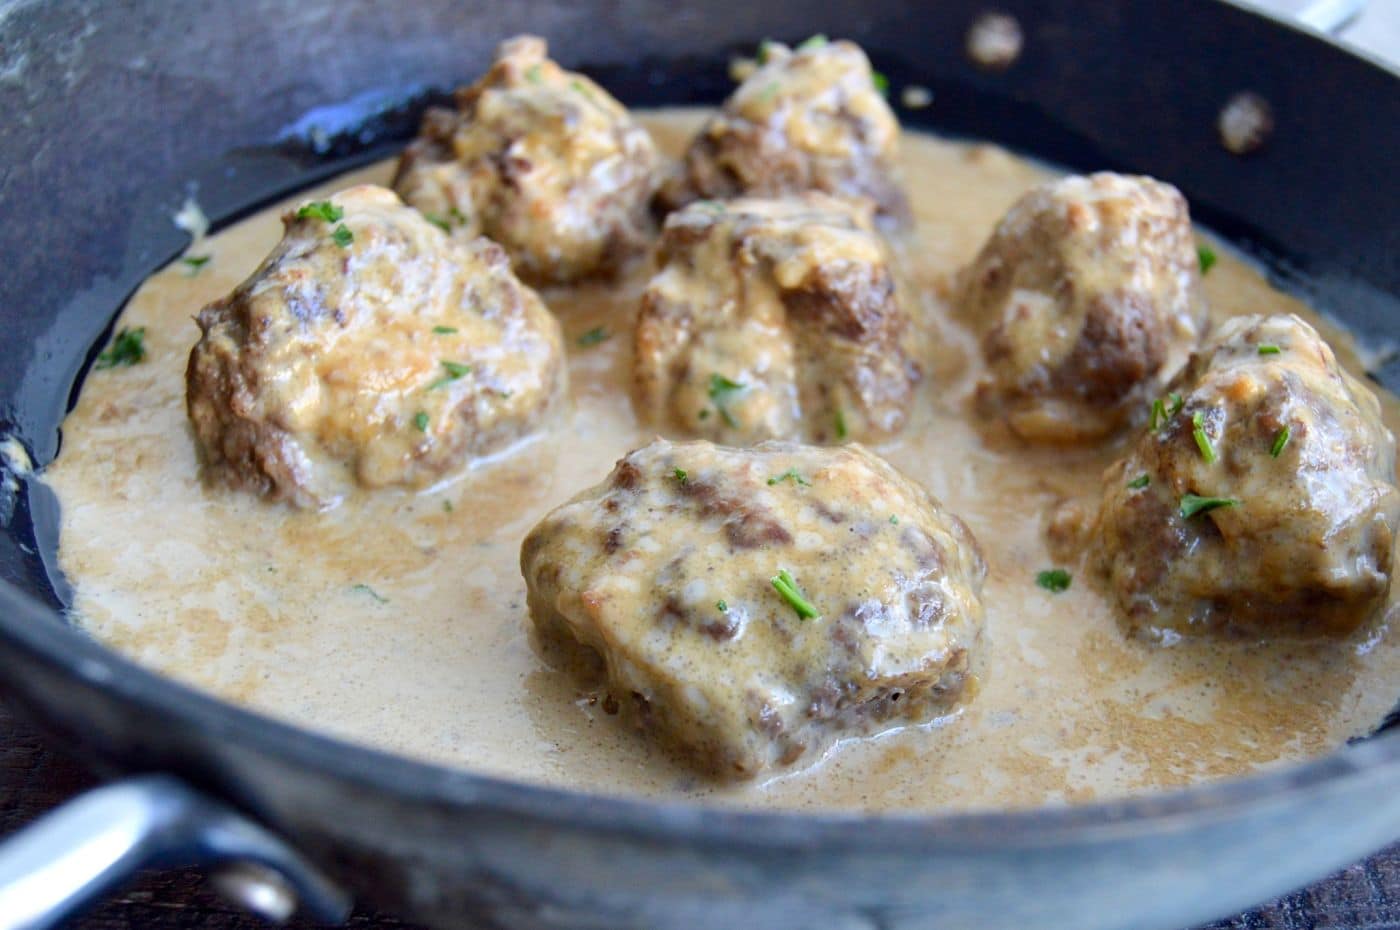 Authentic Swedish Meatballs (IKEA copycat) can be ready to serve in 30 minutes which makes them perfect for last minute meals! Served in a creamy gravy and you only need pantry ingredients and ground beef to make them!